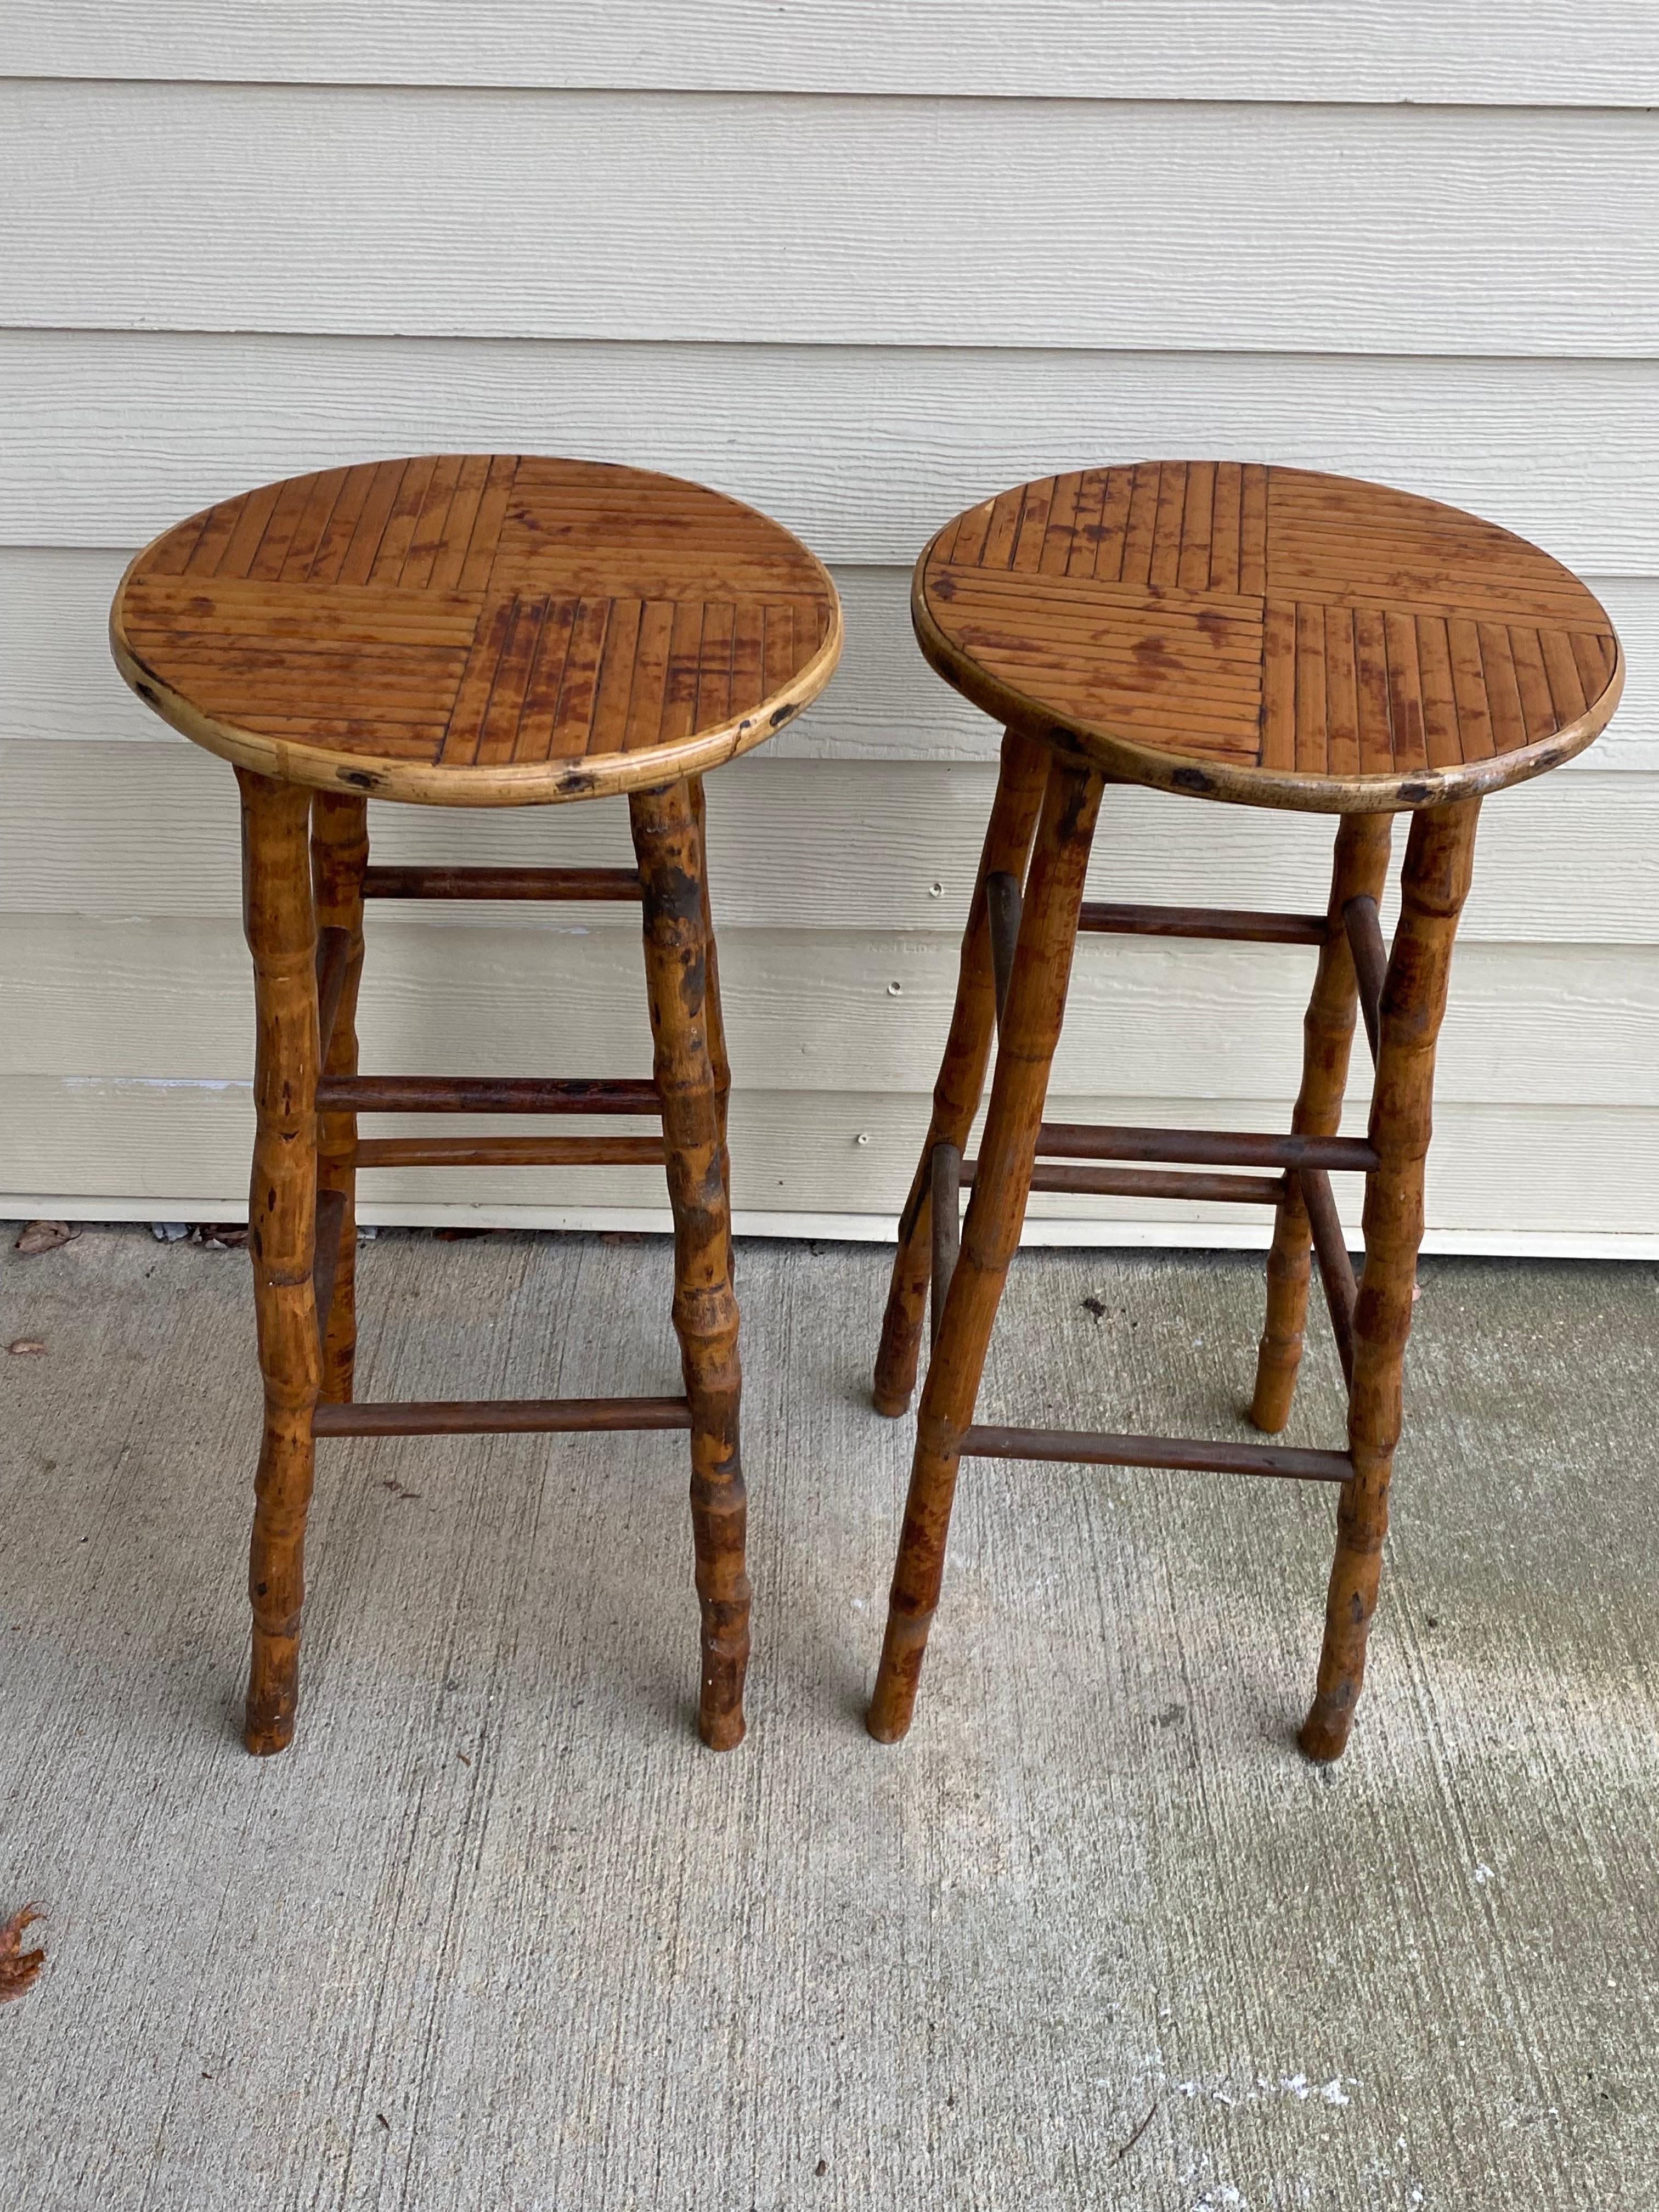 American Mid-century Bamboo Bar Stools For Sale